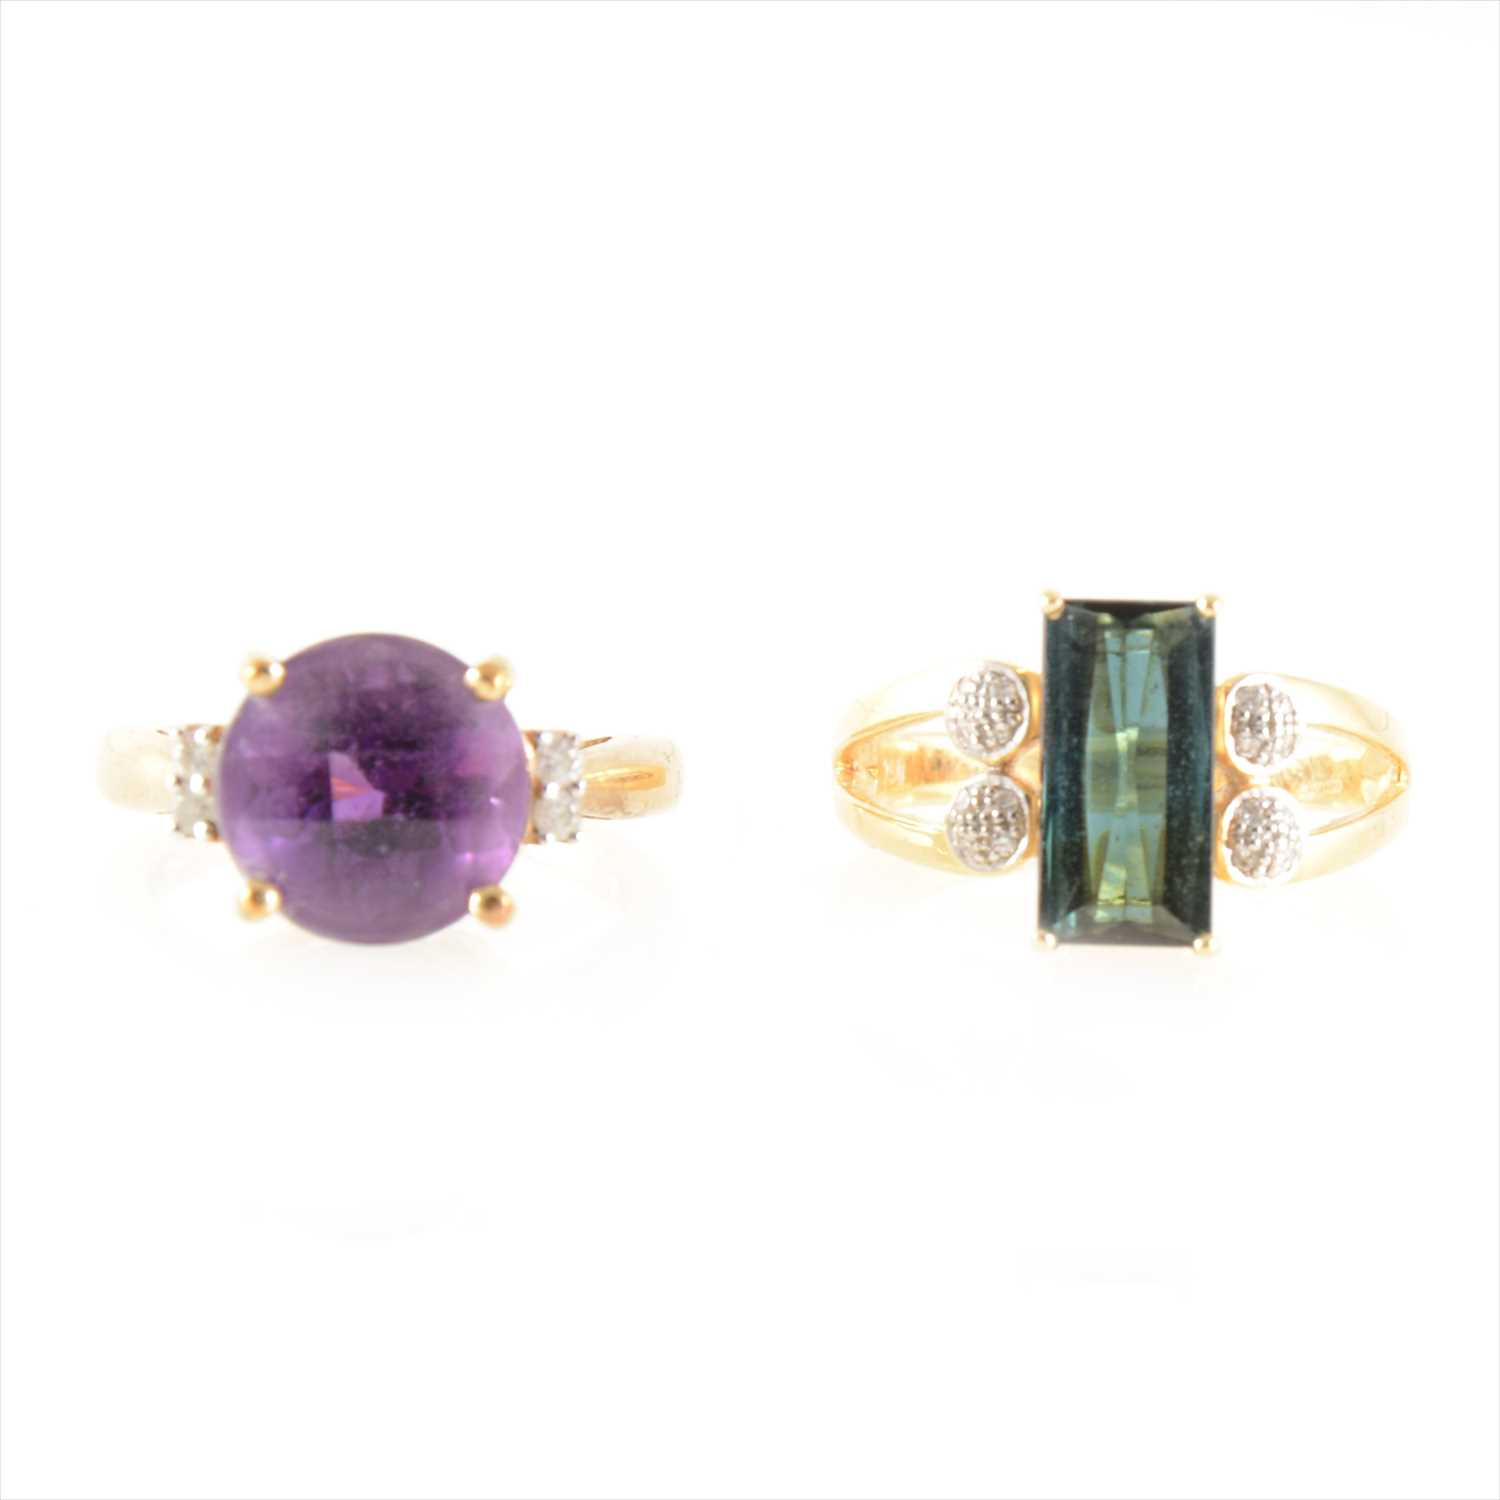 Lot 202 - A "Uruguayan" amethyst and diamond ring, and a tourmaline and clear stone ring.